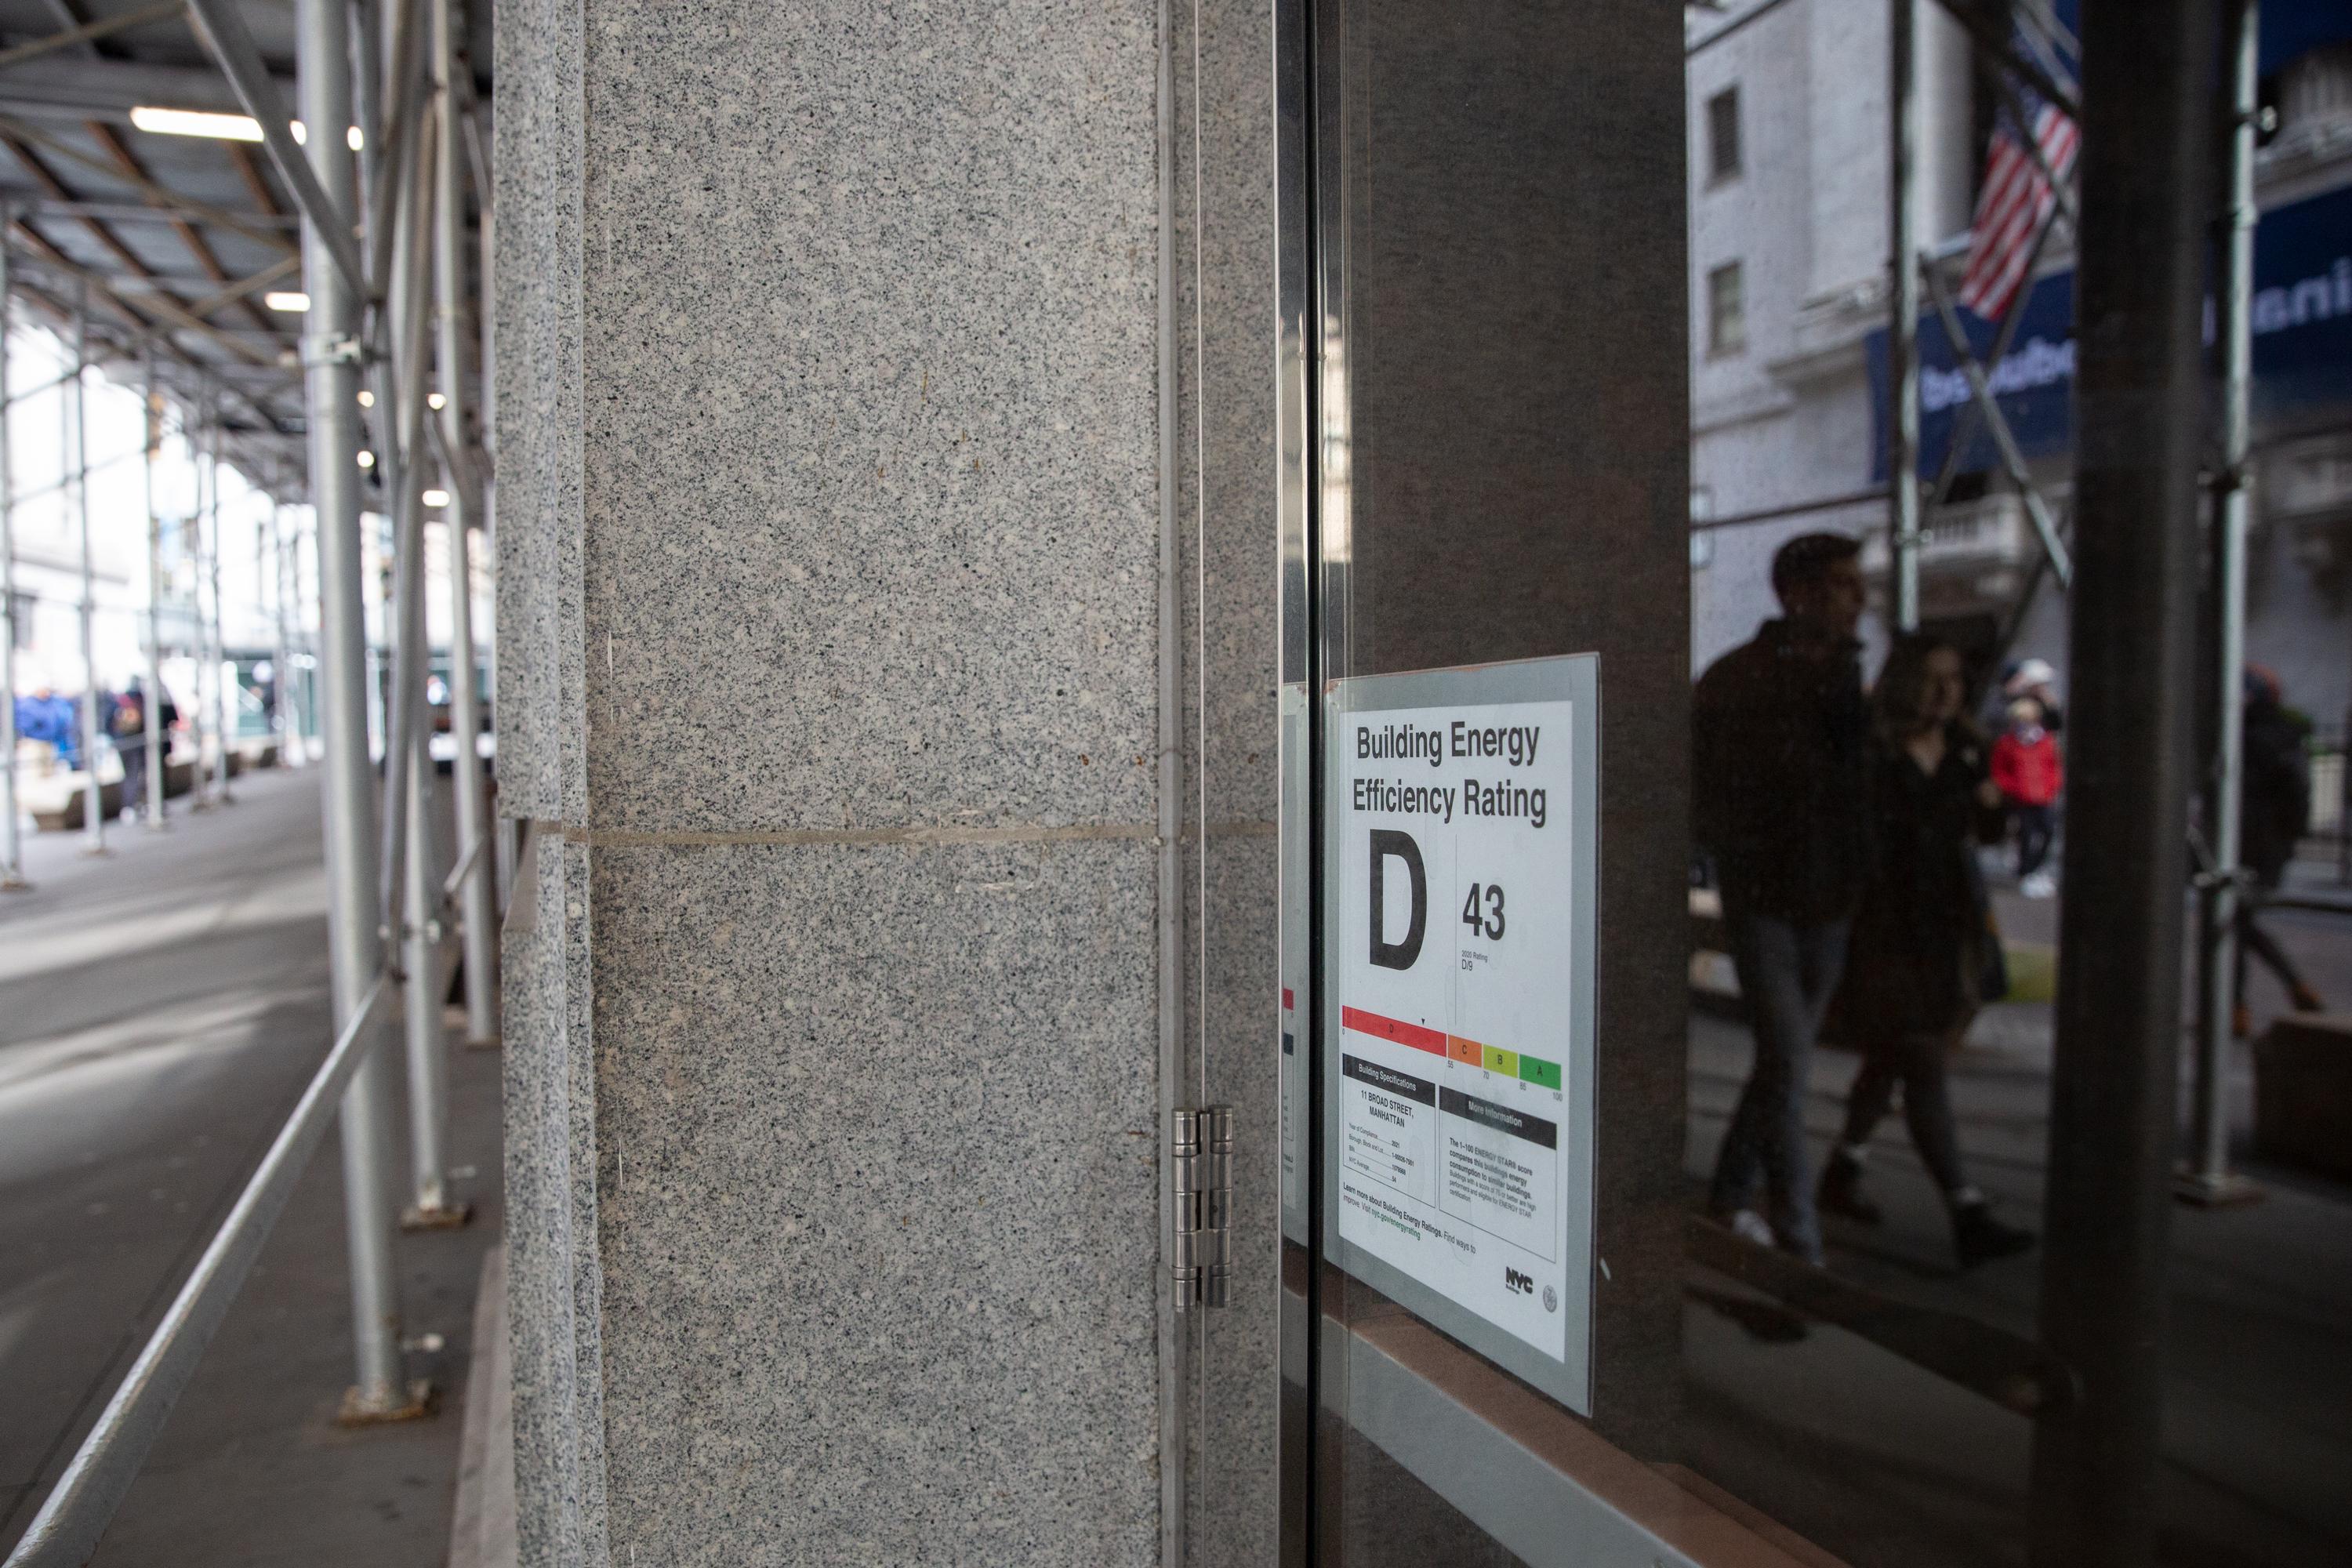 A building at 11 Broad St. in the Financial District had a “D” energy efficiency rating, Nov. 15, 2021.